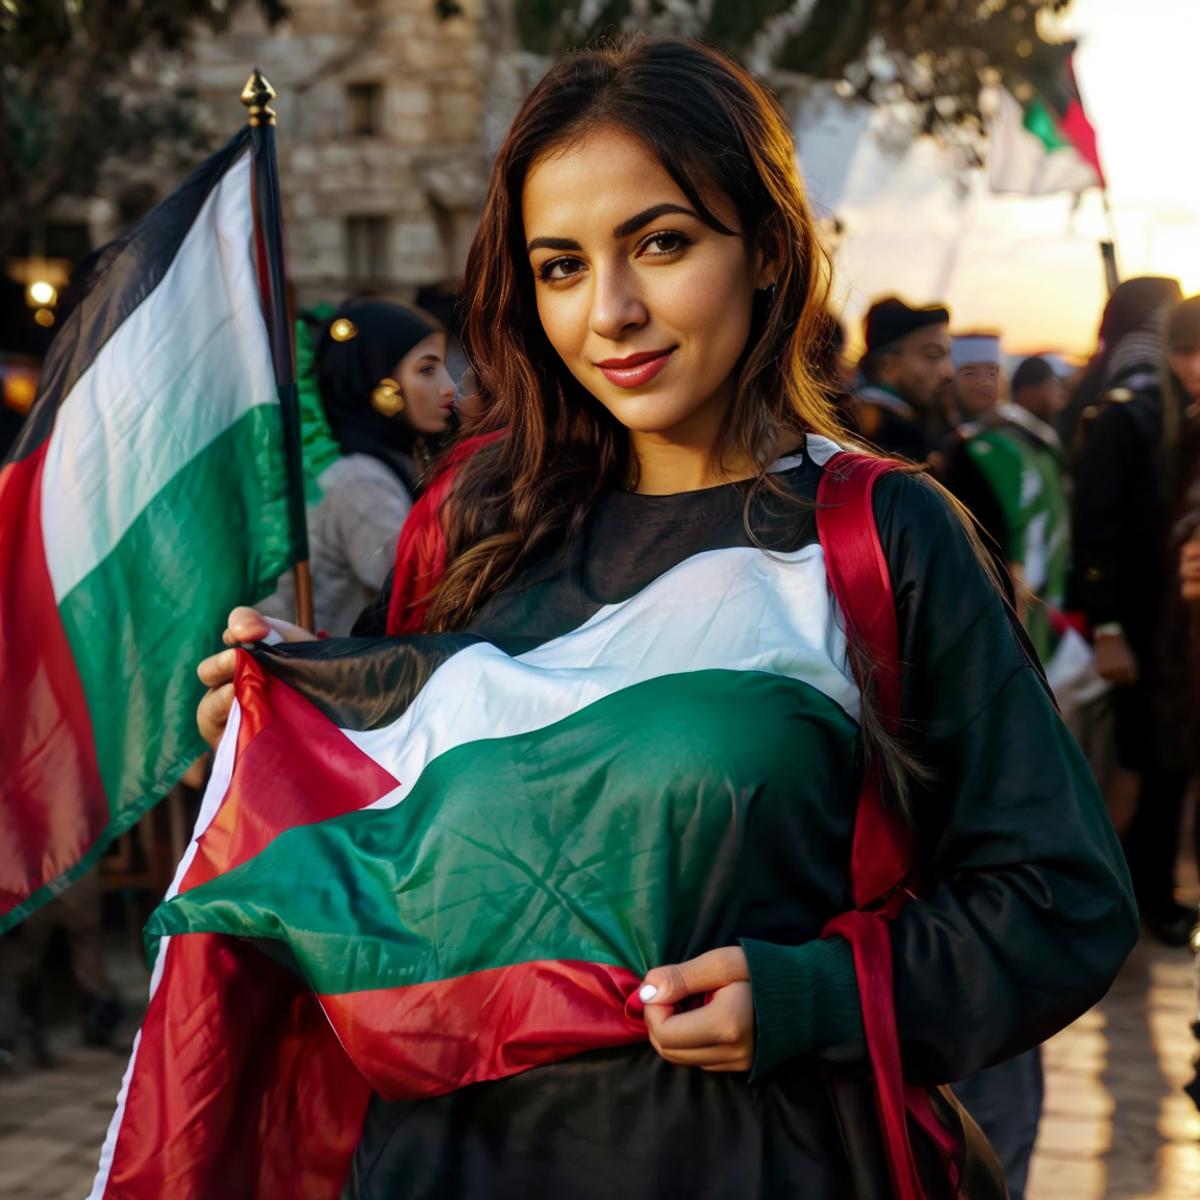 A woman wearing a black and white shirt holds a Palestinian flag, surrounded by other people.